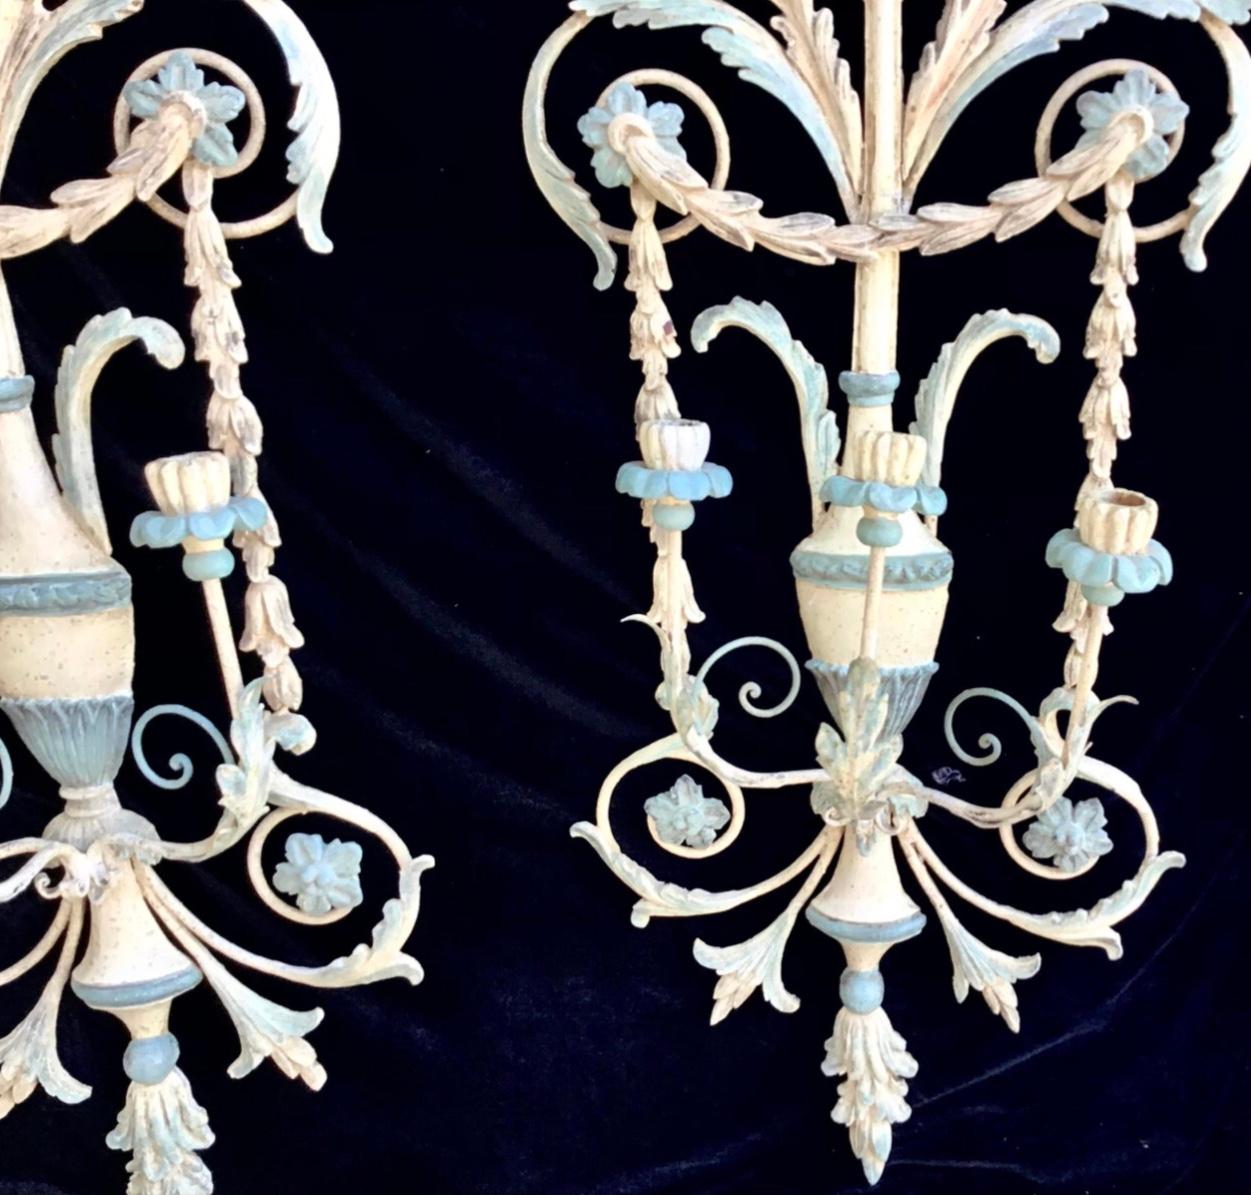 Pair of Venetian wall sconces, Italy. Elaborate painted details. Solid wood, mounted on metal frames. Carved and painted in a wonderful mix of color. 3 arms each. Richly ornamented and ornate body and design with floral scrolls and urns topped with